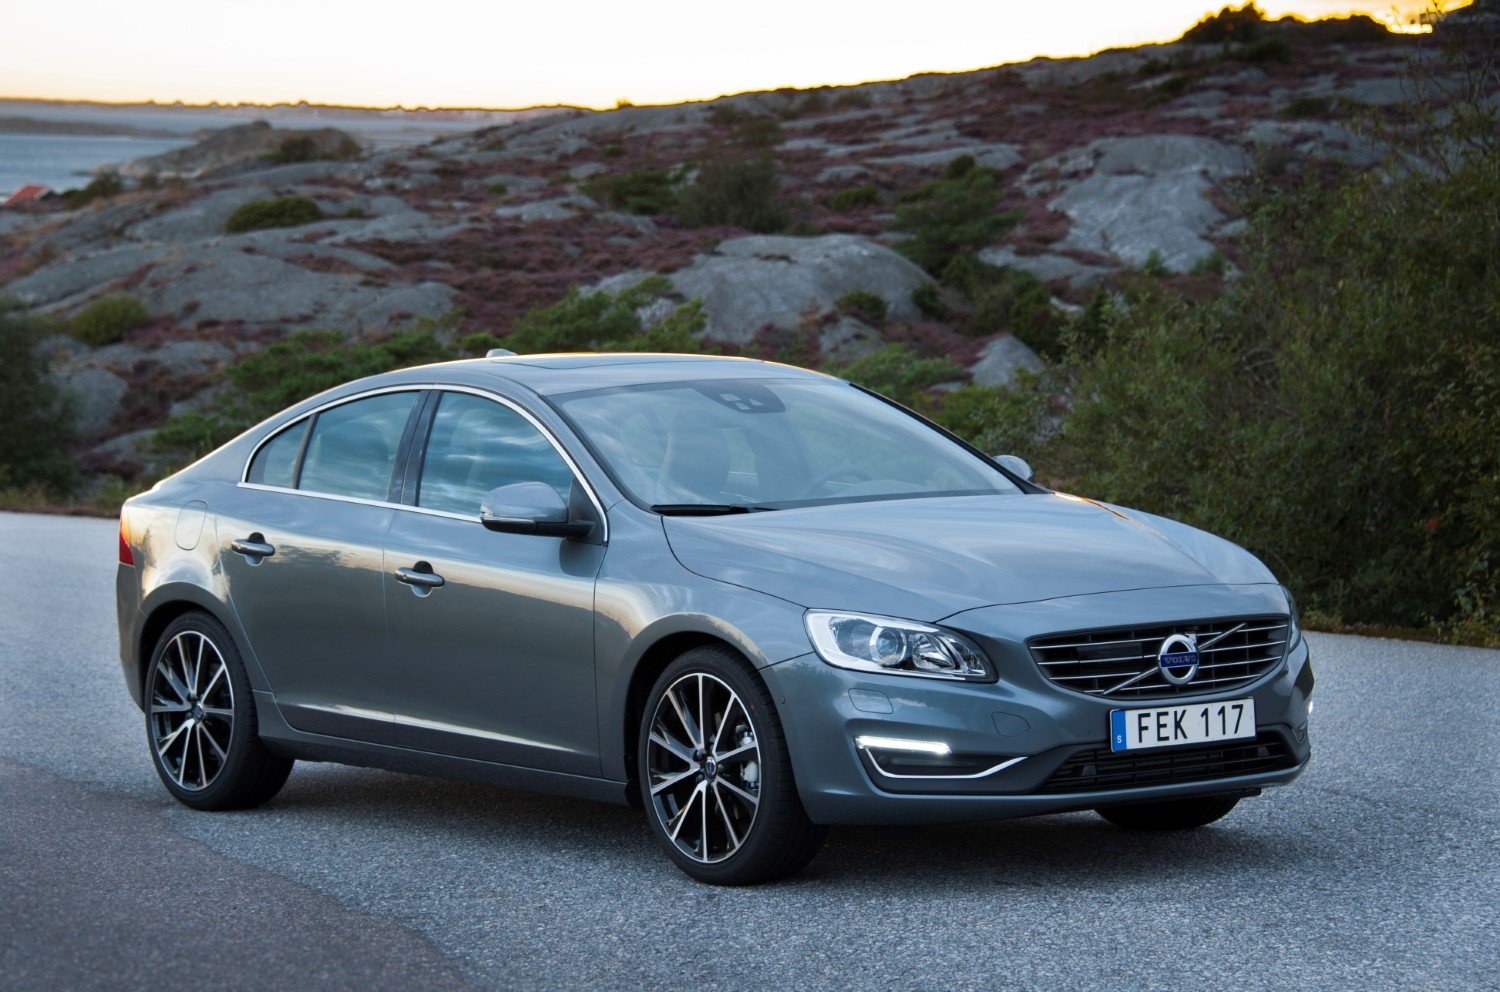 2018 Volvo S60 Sedan Specs, Review, and Pricing | CarSession